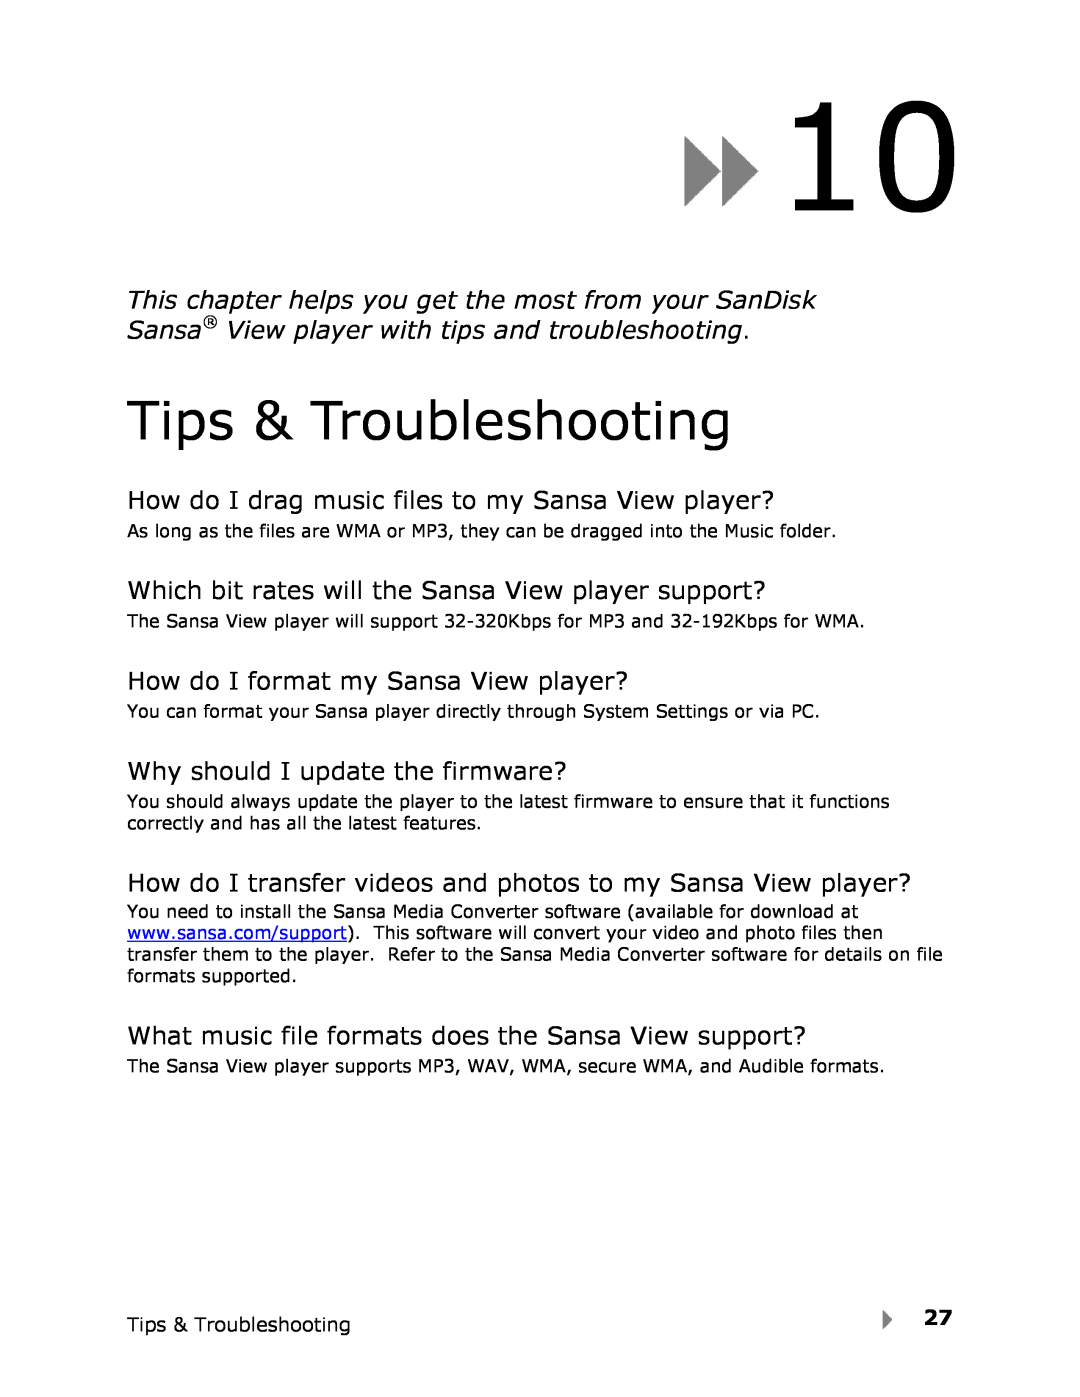 SanDisk View user manual Tips & Troubleshooting 